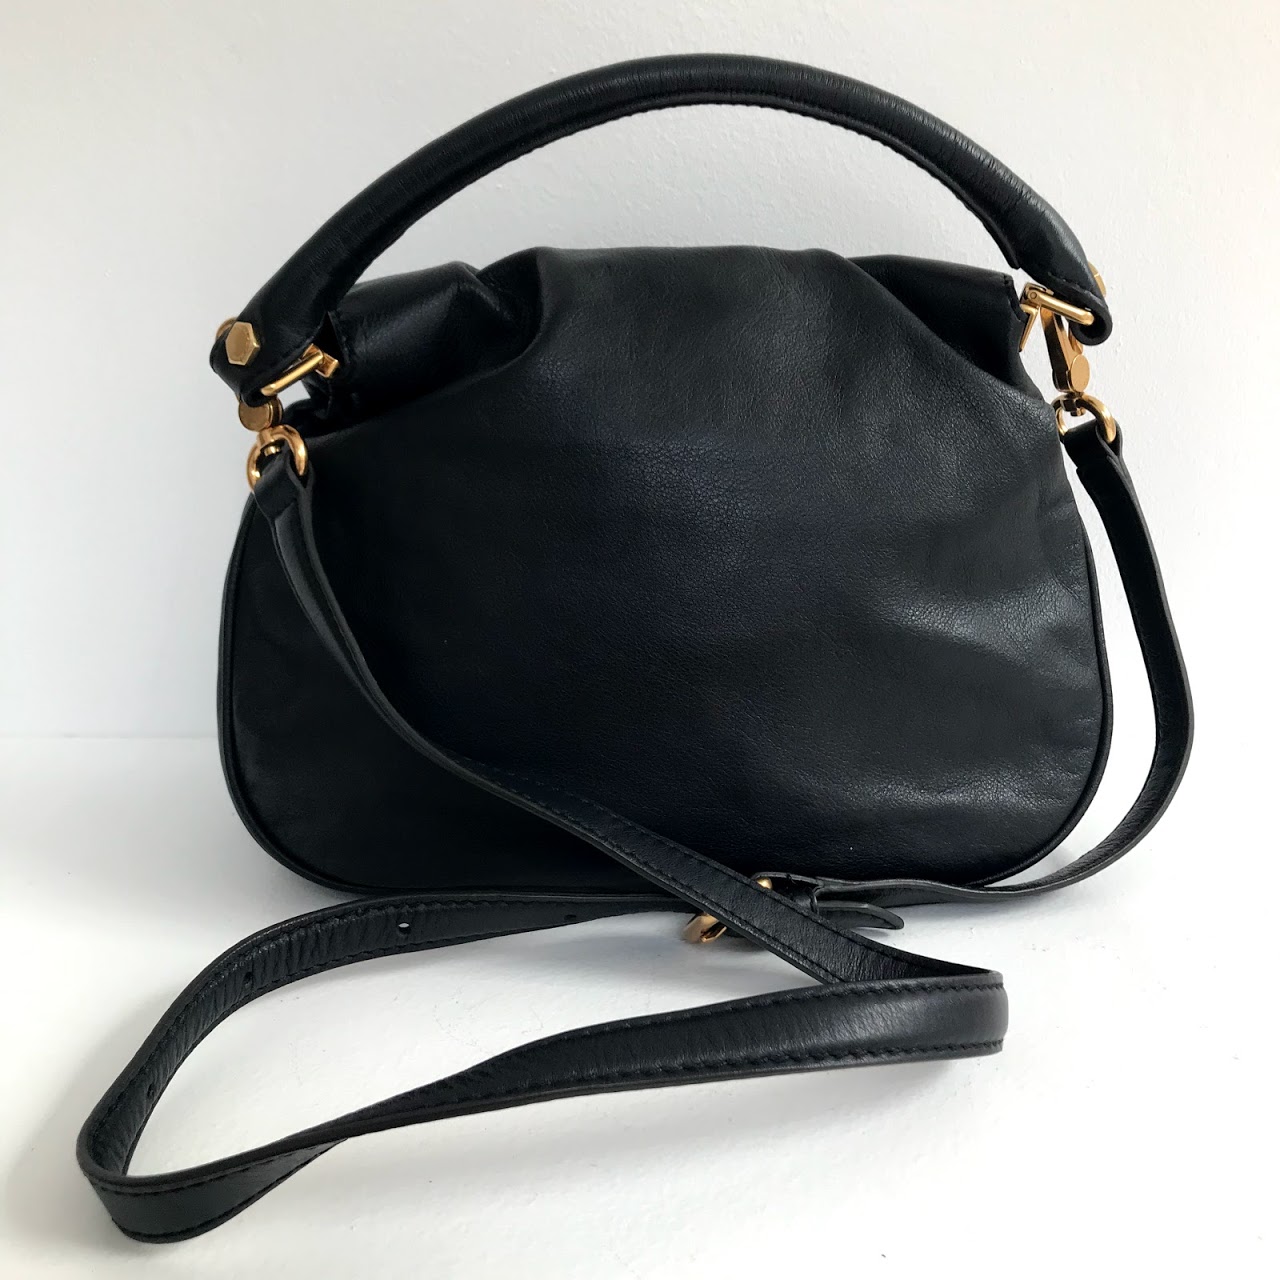 Marc by Marc Jacobs Black Leather Crossbody Bag